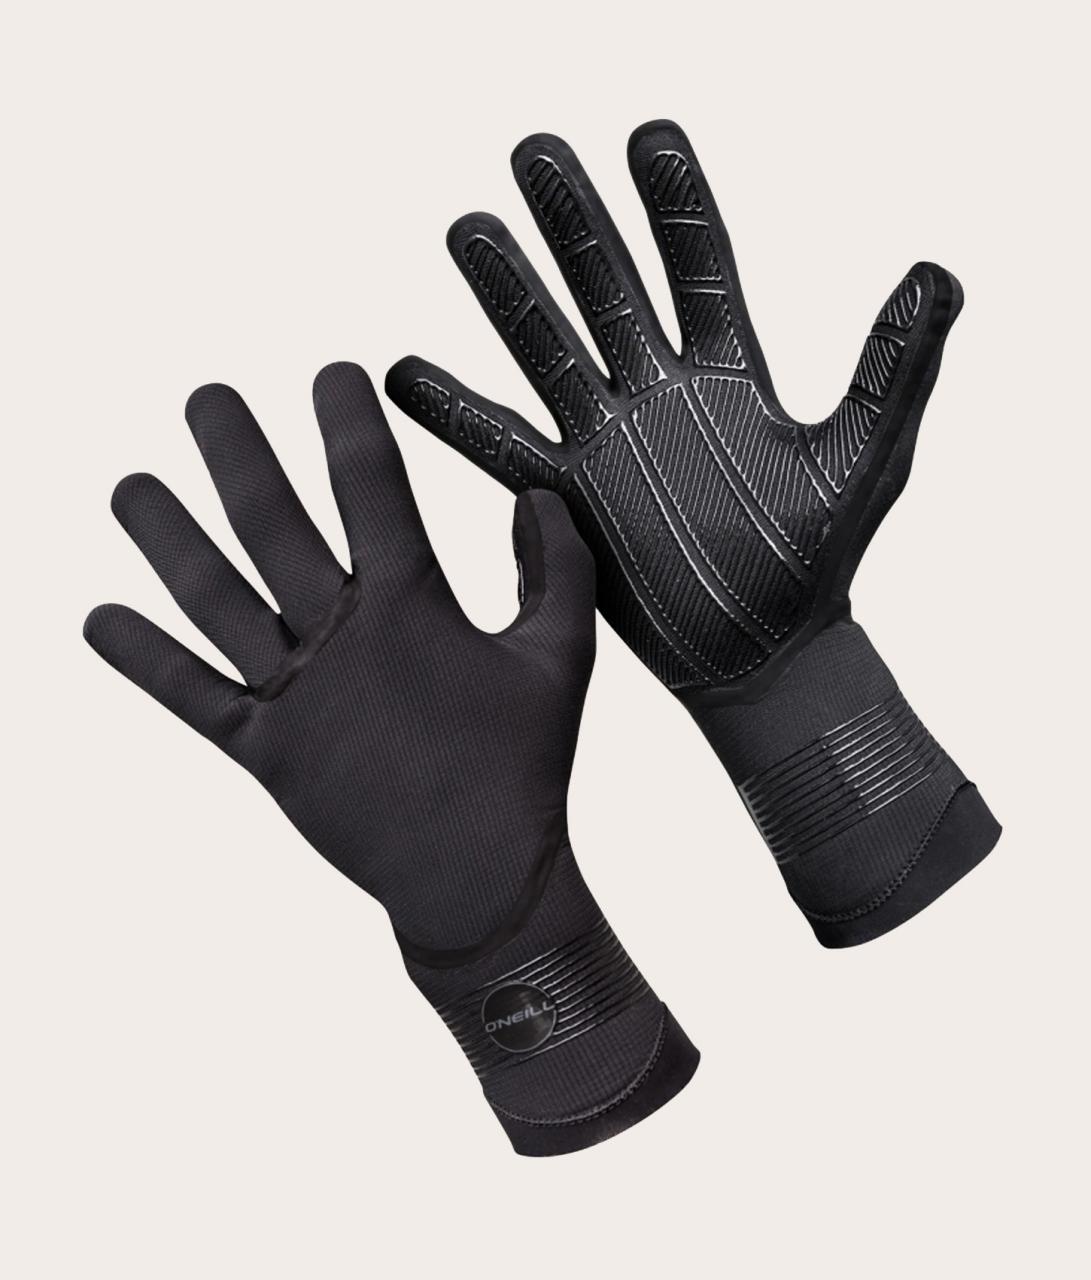 3mm Double Lined Psycho Tech Glove